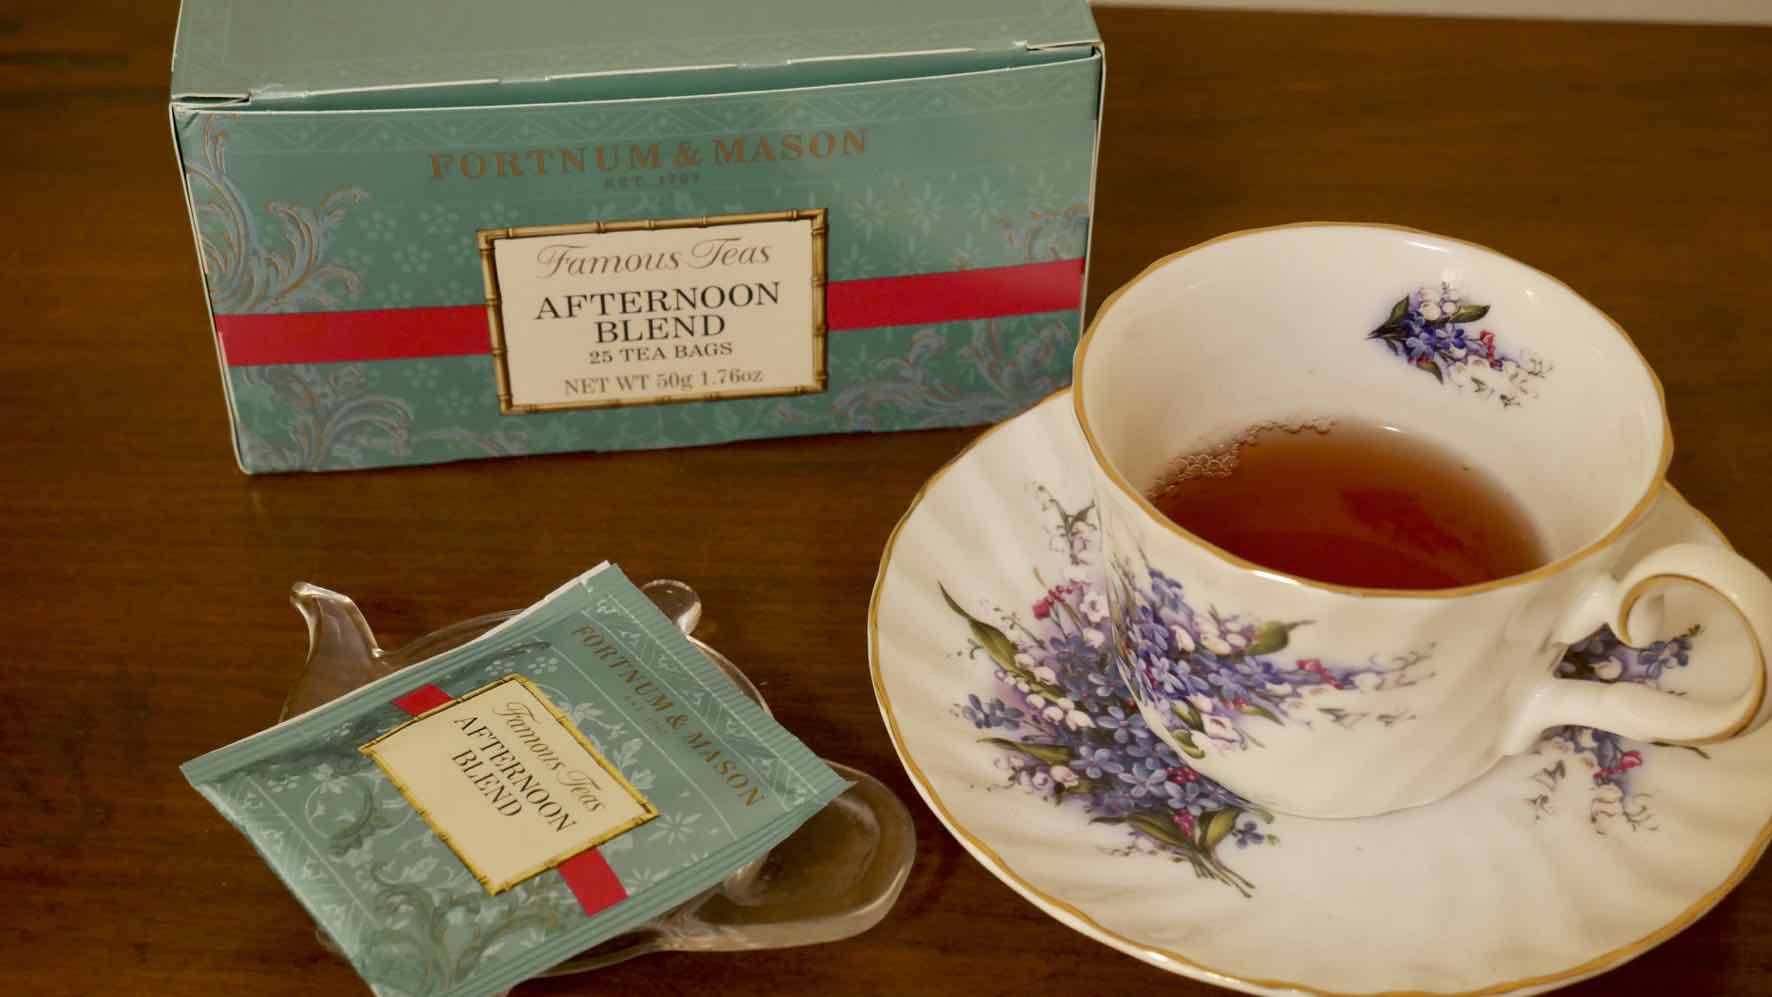 package of Fortnum & Mason's Afternoon Blend tea, teabag and cup of brewed tea